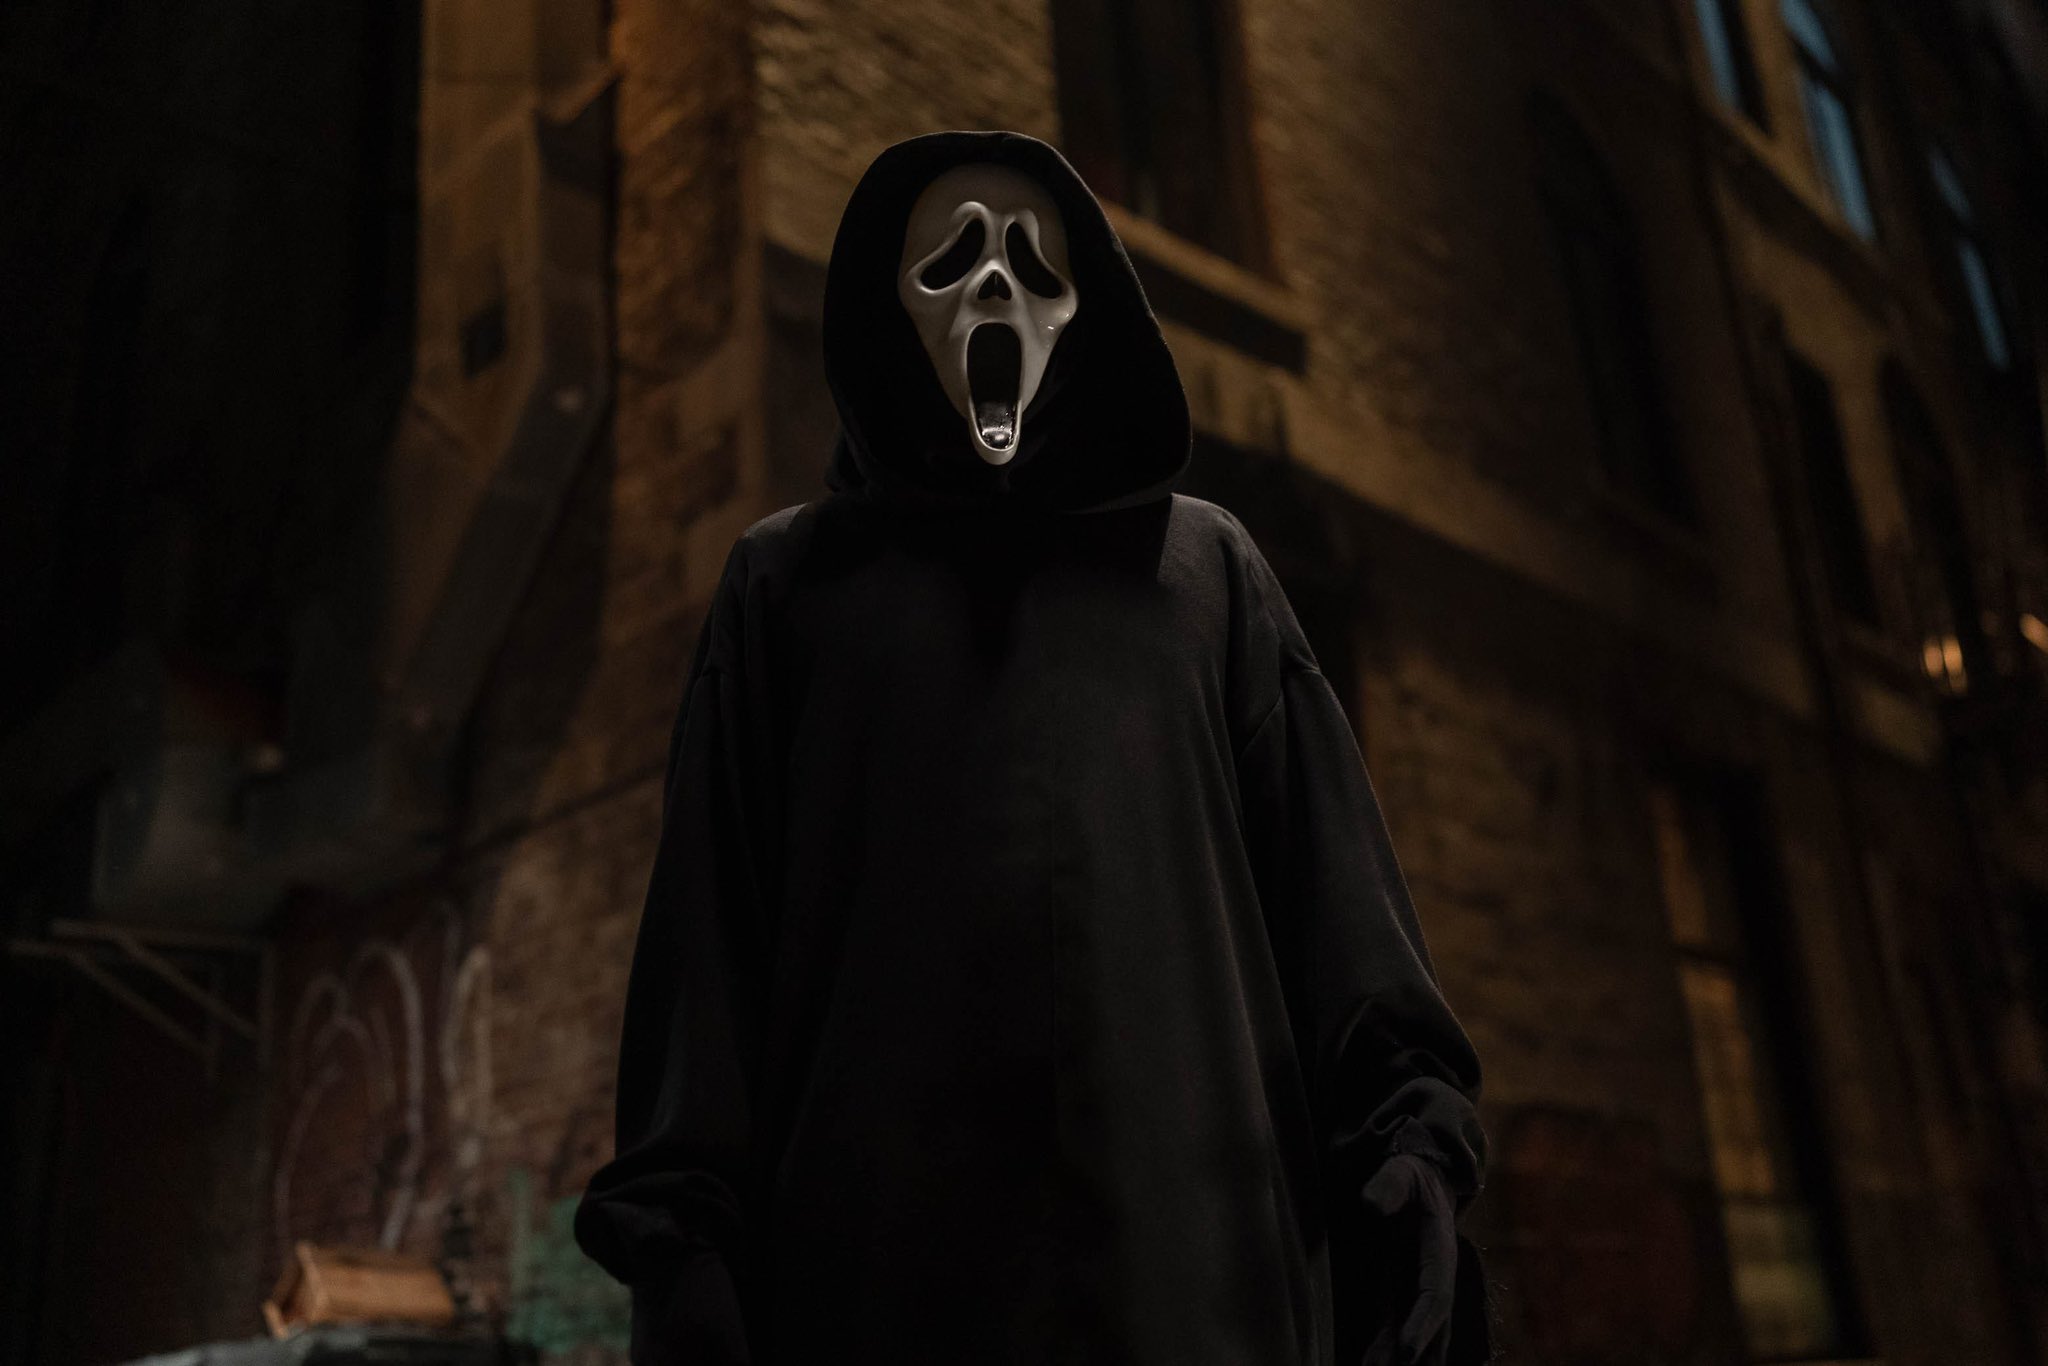 We finally get to see what Ghost looks like under the mask